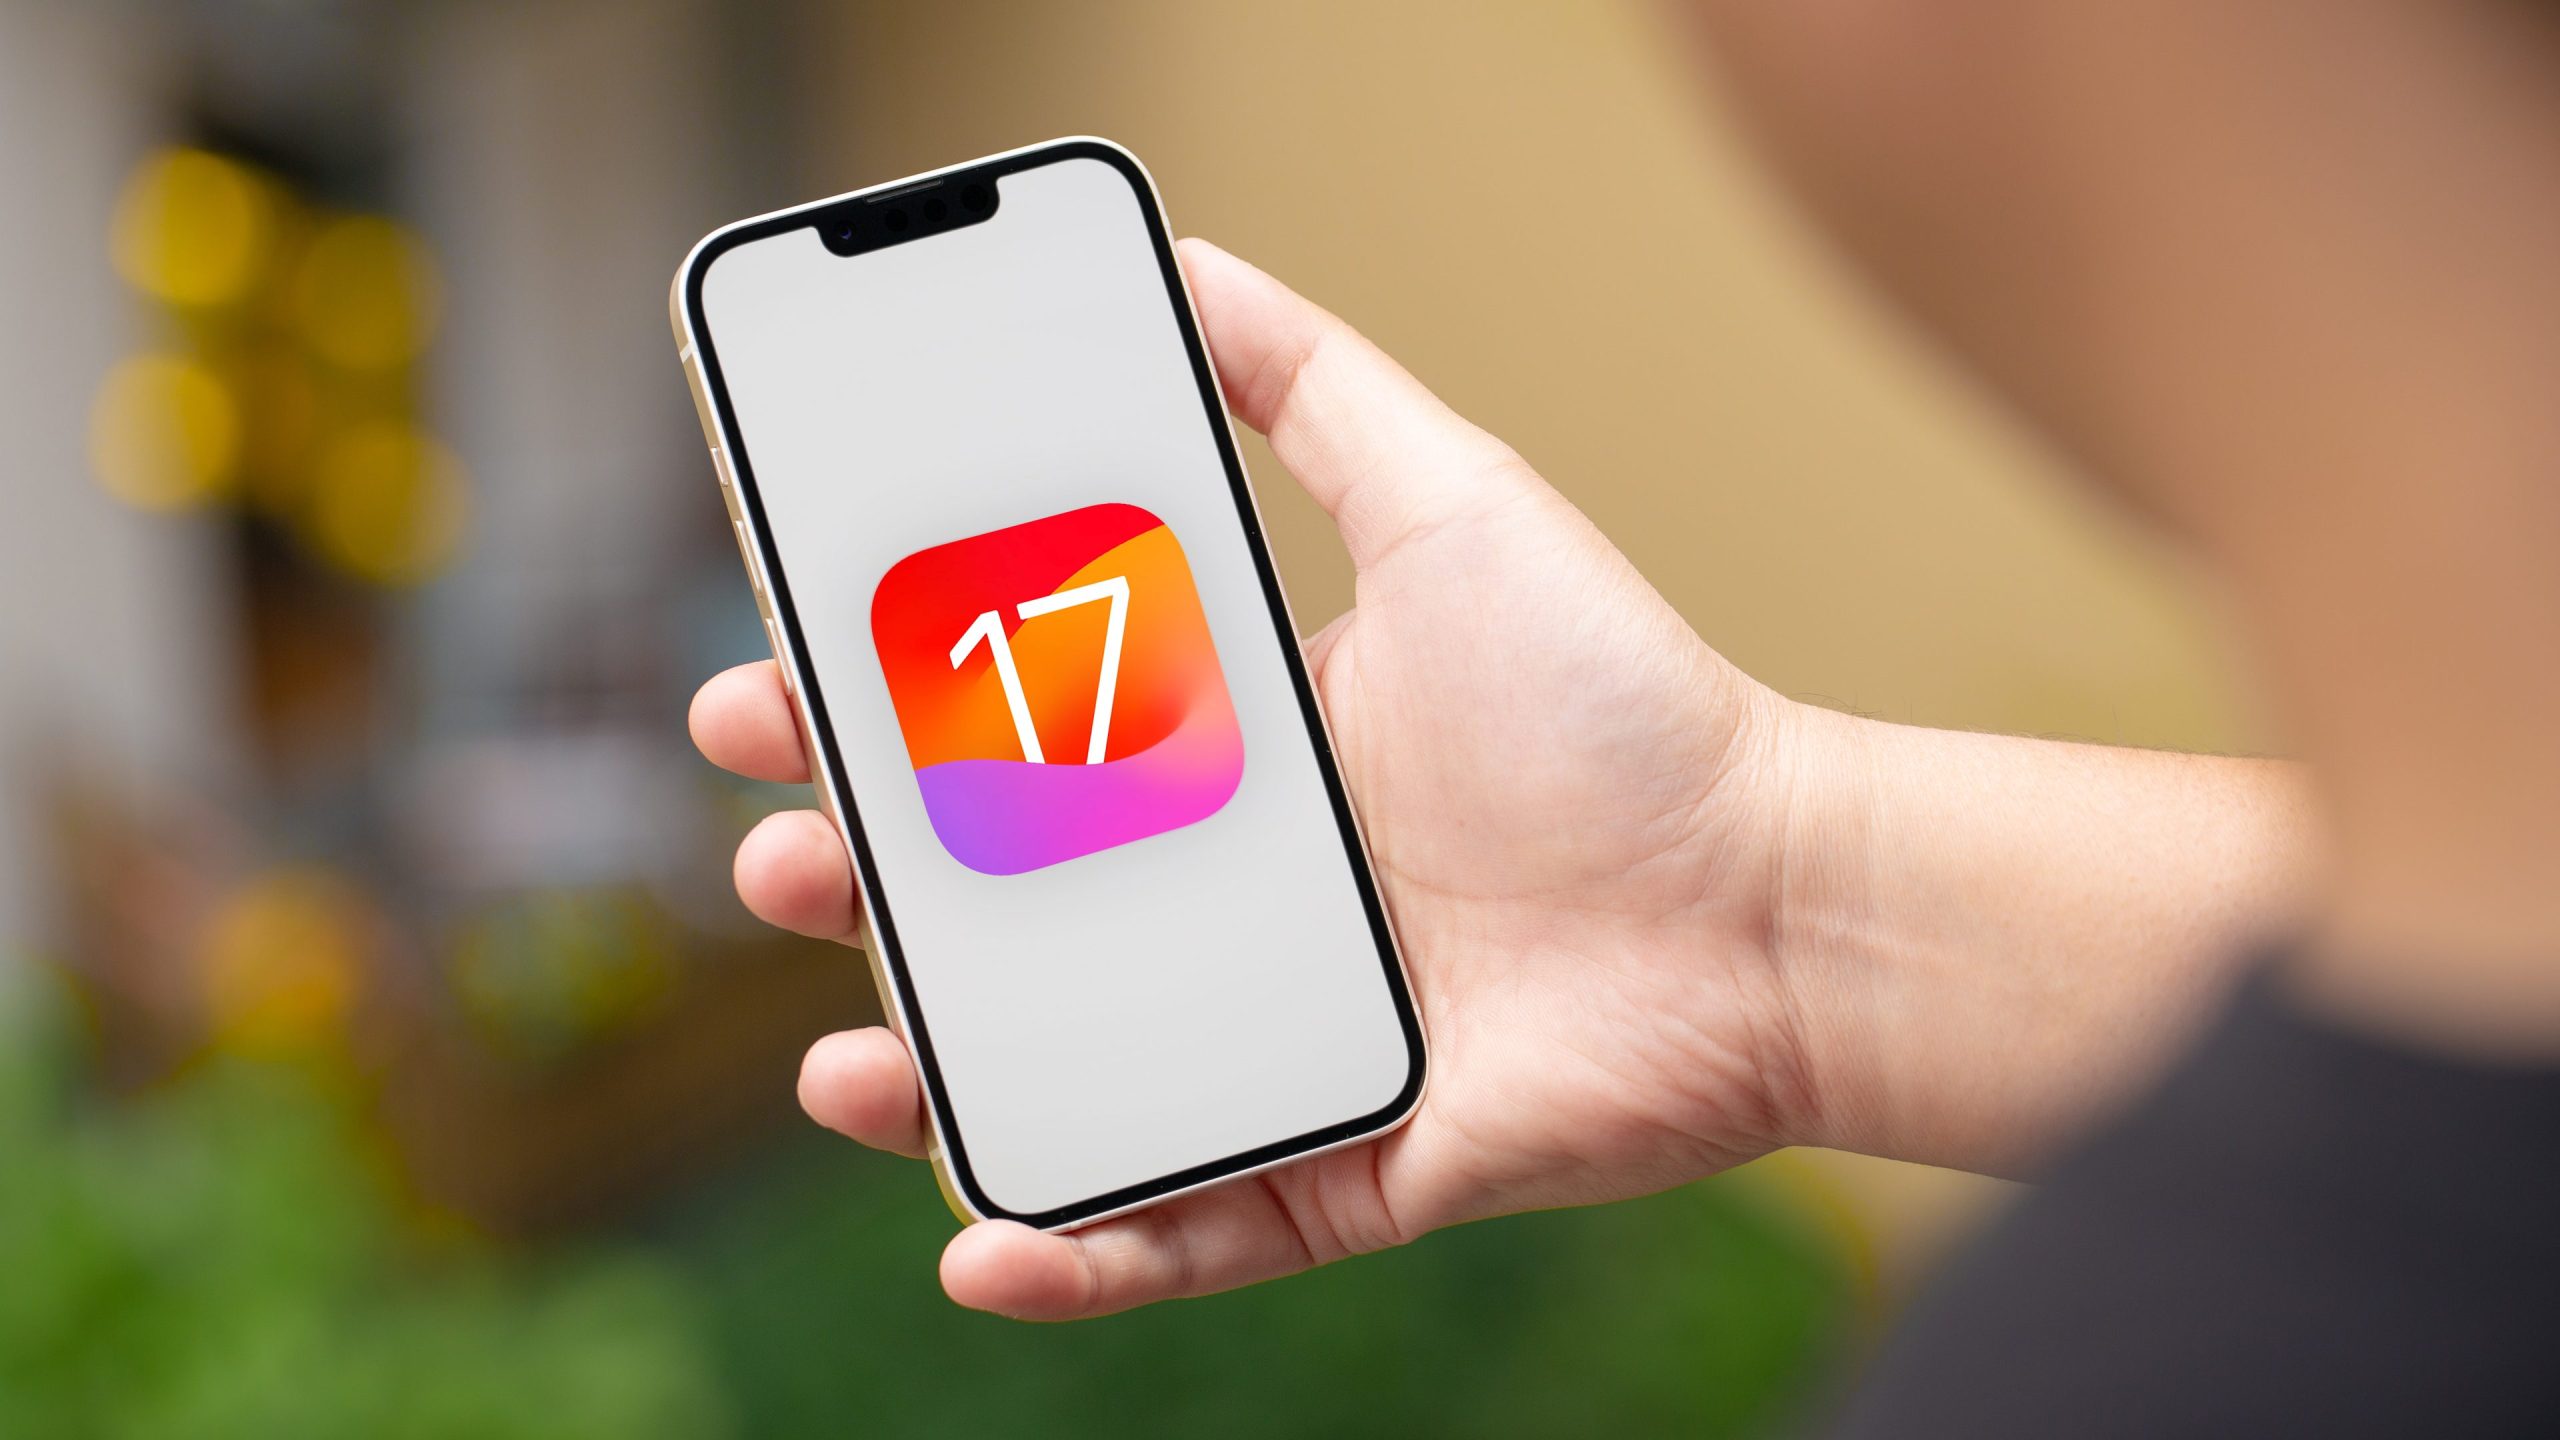 iOS 17: Your iPhone's Big Transformation – What's New in the Latest Update